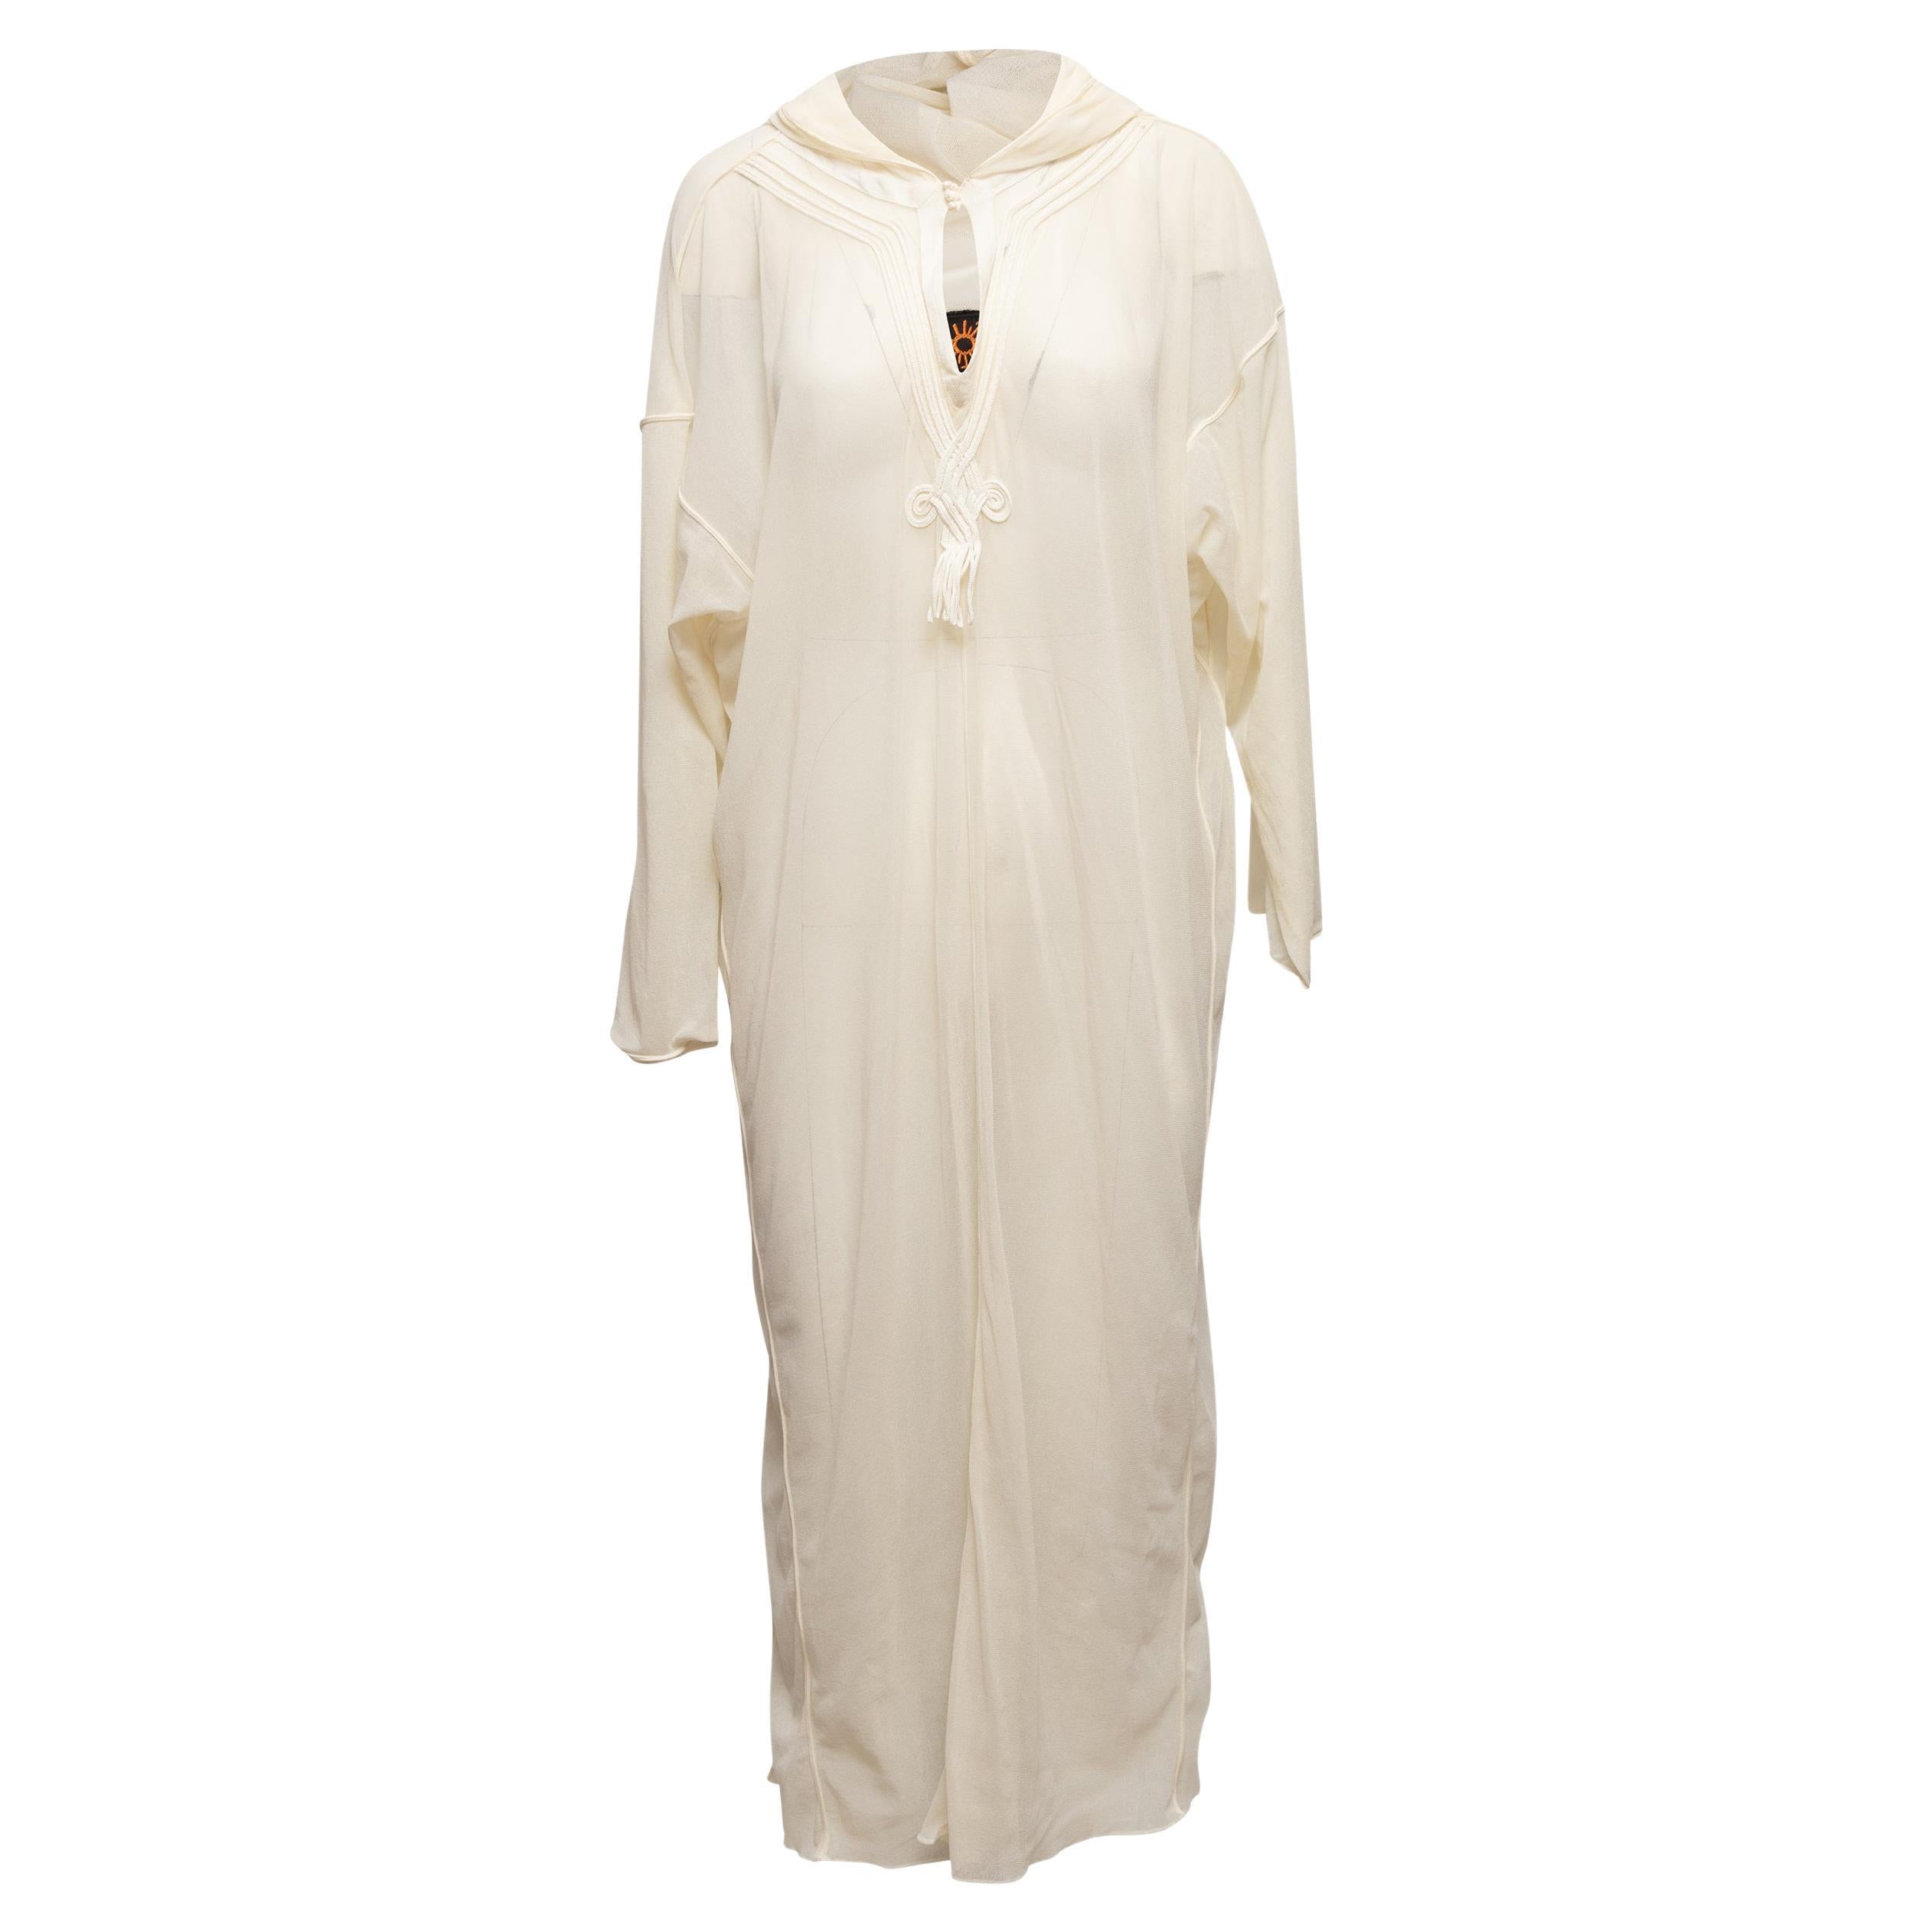 Blanc Jean Paul Gaultier Soleil Mesh Hooded Cover-Up Dress